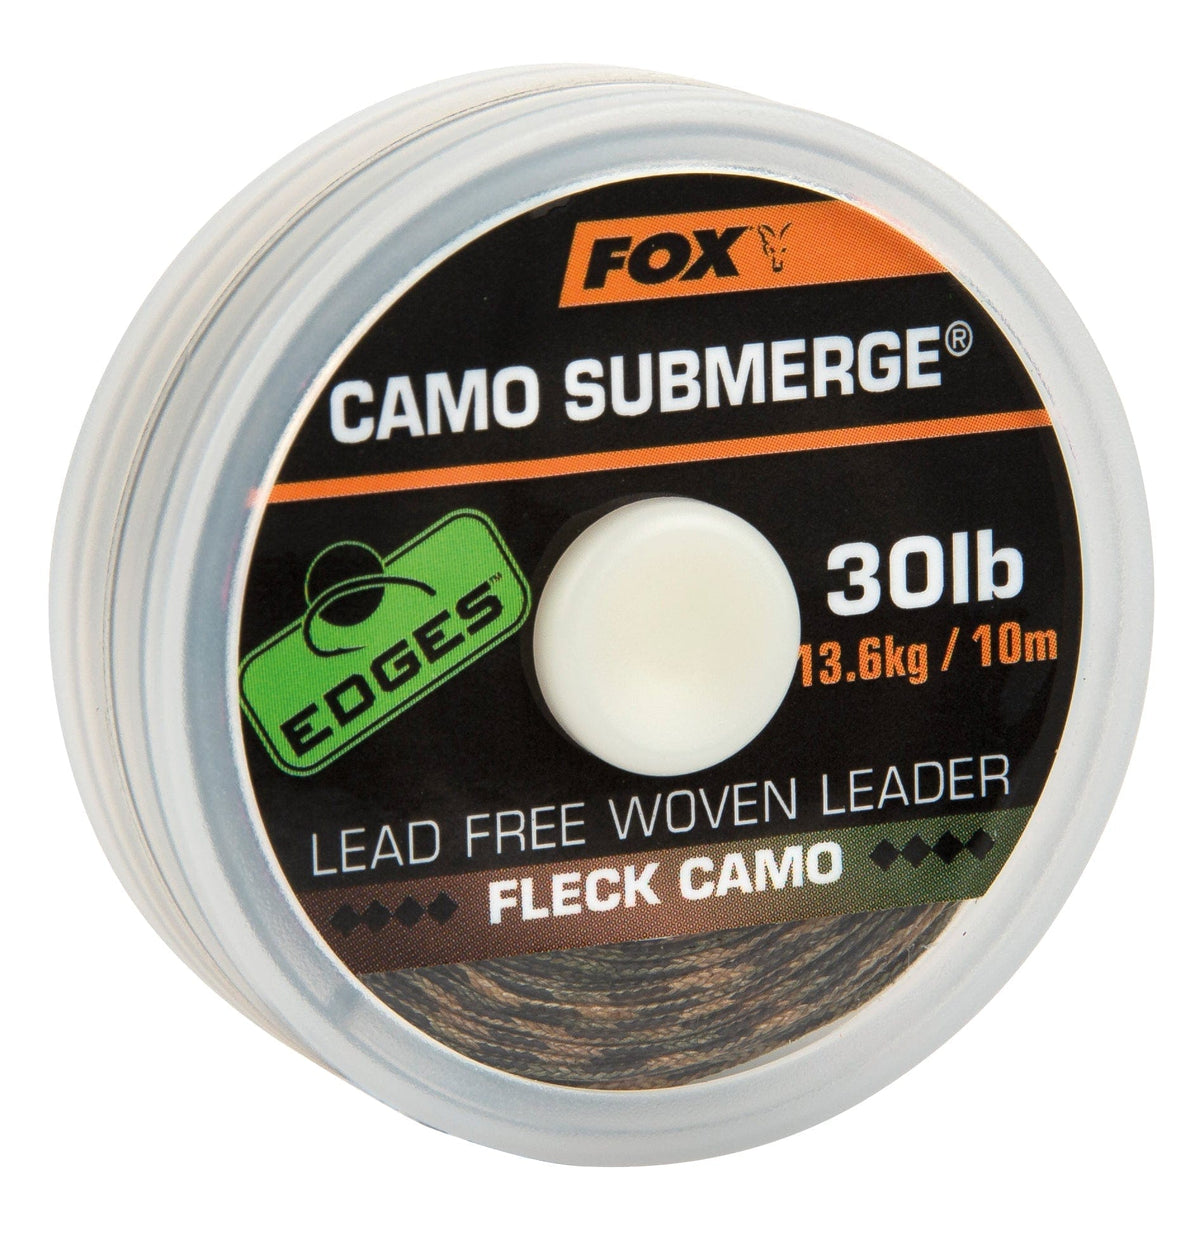 FOX Camo Submerged  - Lead Free Woven Leader - 10m - All Breaking Strains.